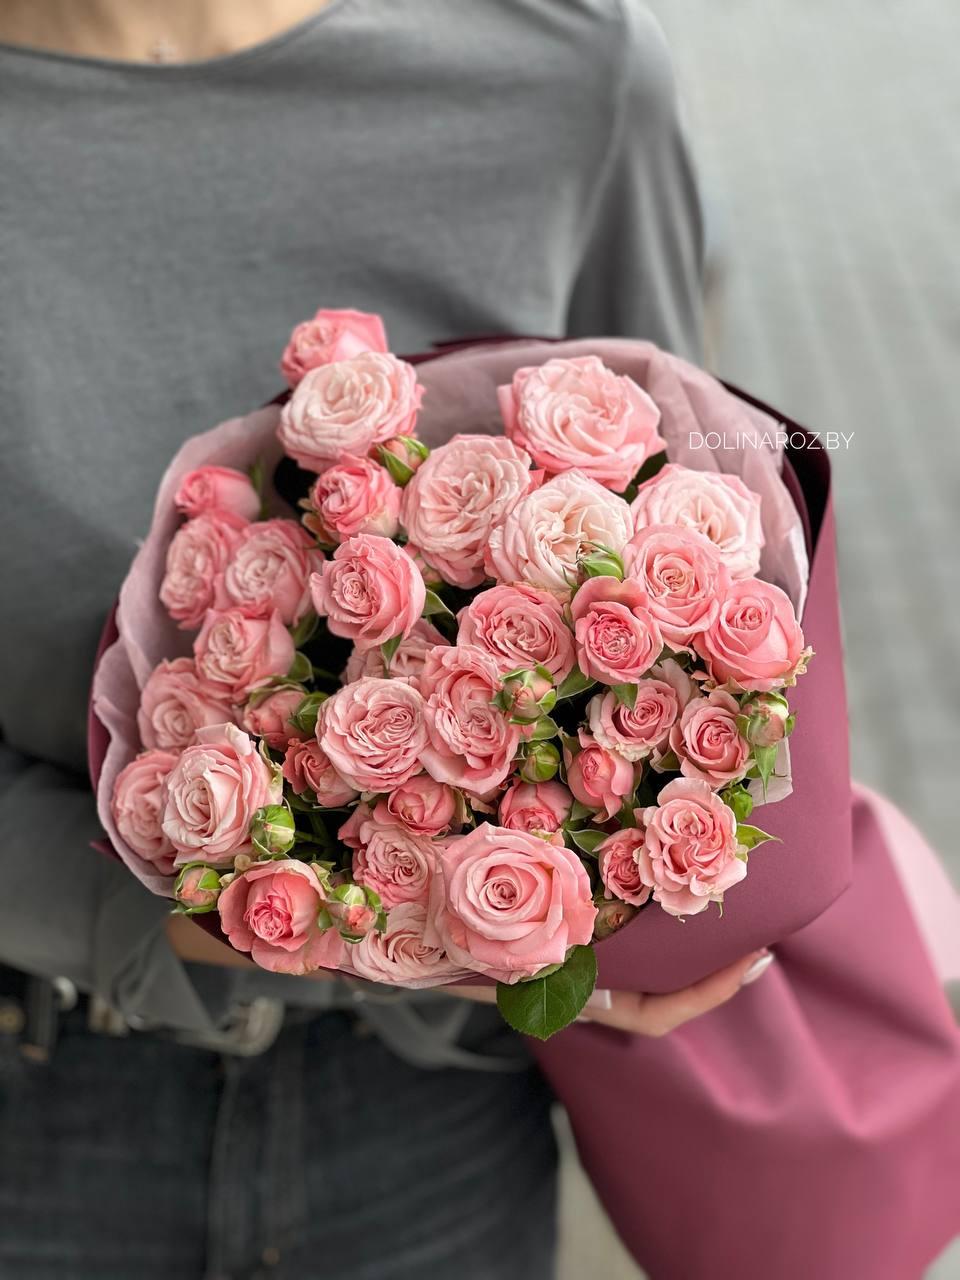 Bouquet of roses "Declaration of love"